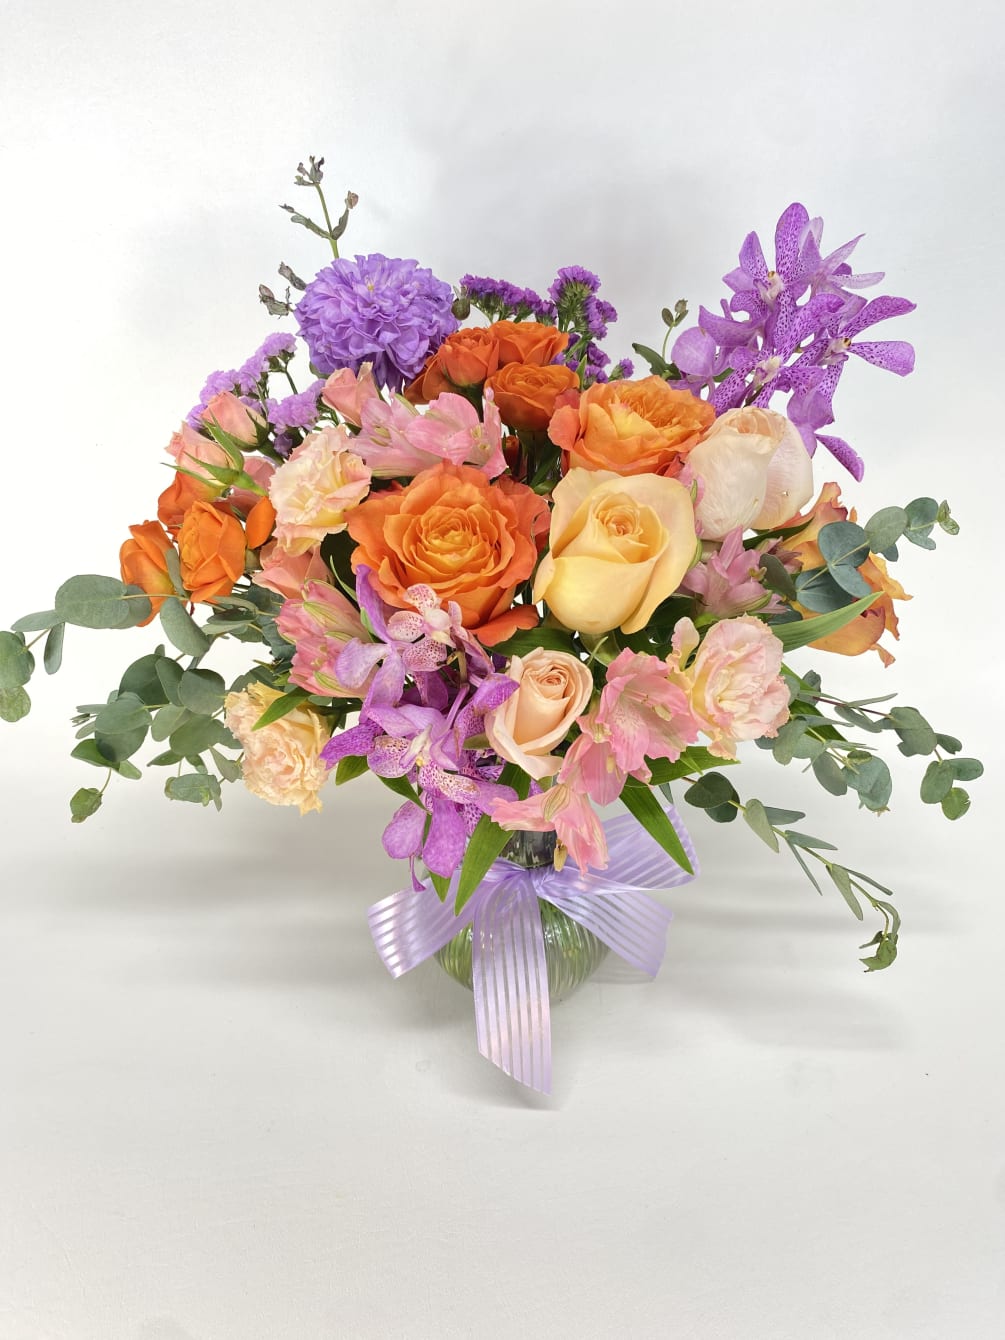 Cute and bright flower arrangement  with a seasonal tones of Orange